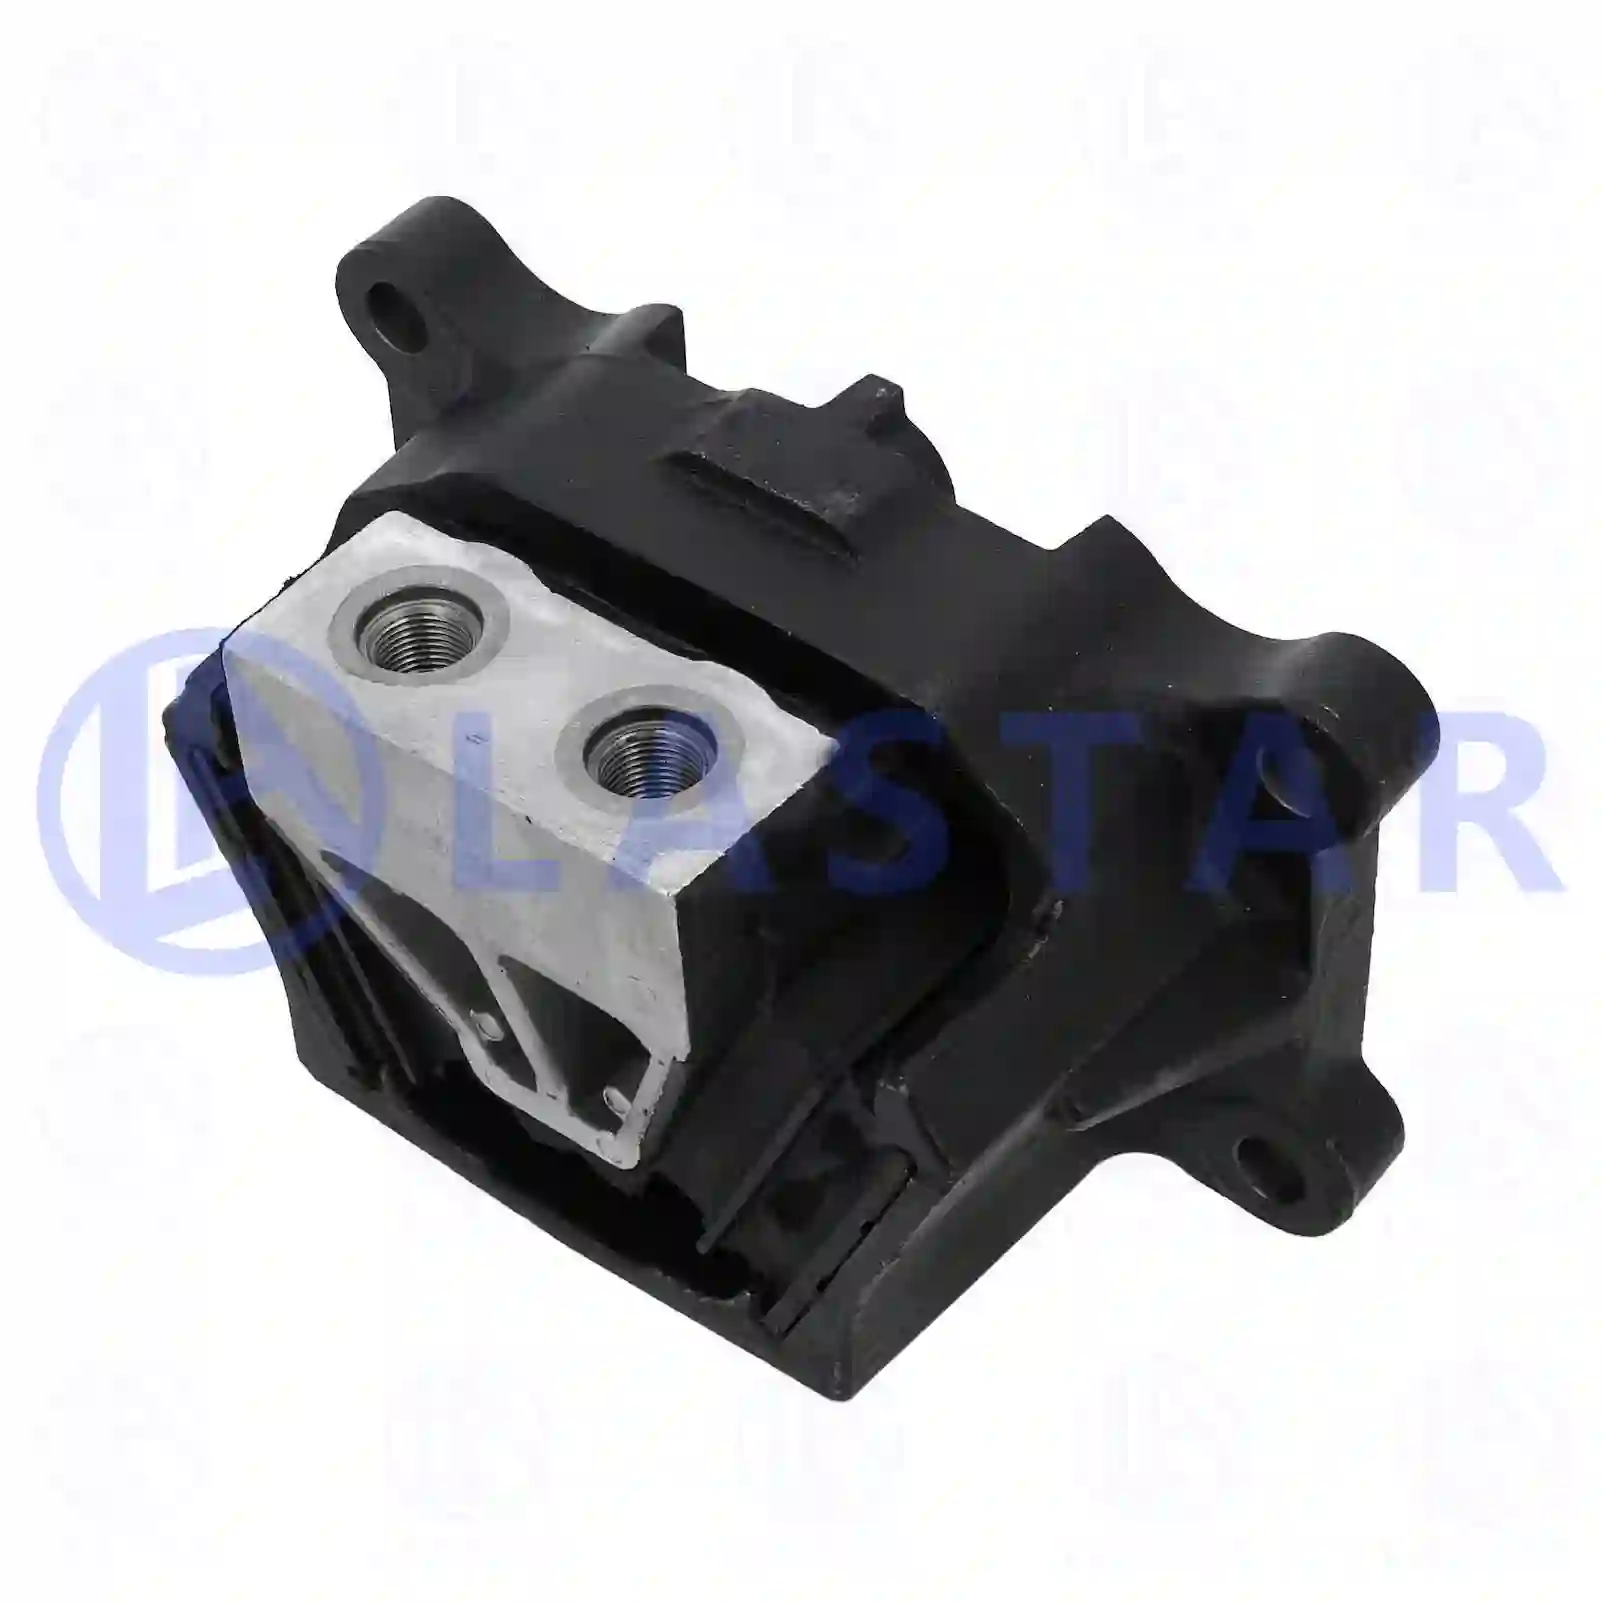 Engine mounting, 77702412, 9412418913, , , , ||  77702412 Lastar Spare Part | Truck Spare Parts, Auotomotive Spare Parts Engine mounting, 77702412, 9412418913, , , , ||  77702412 Lastar Spare Part | Truck Spare Parts, Auotomotive Spare Parts